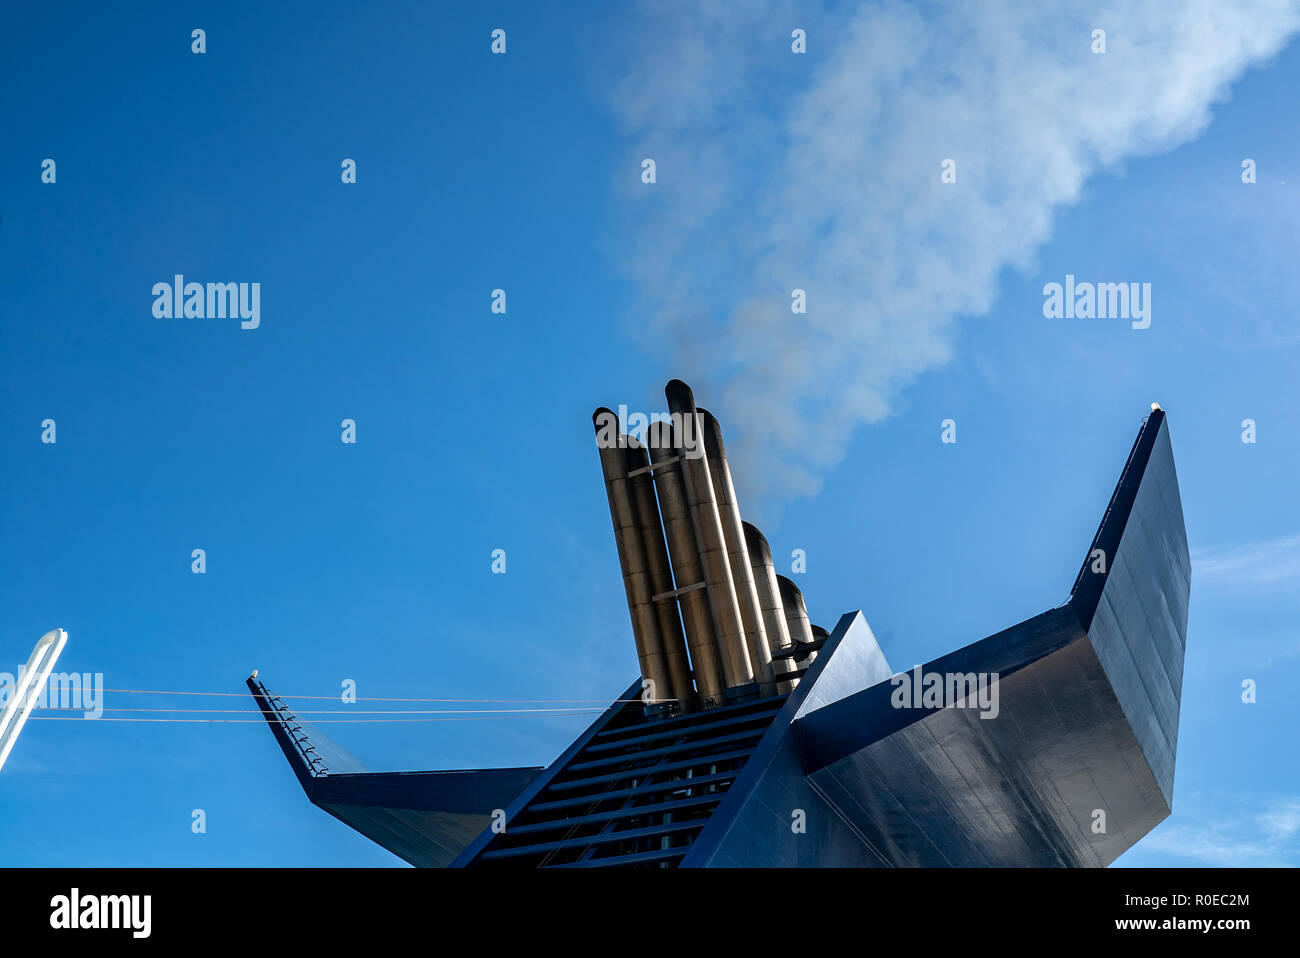 Chimney with smoke of a ferry boat Stock Photo